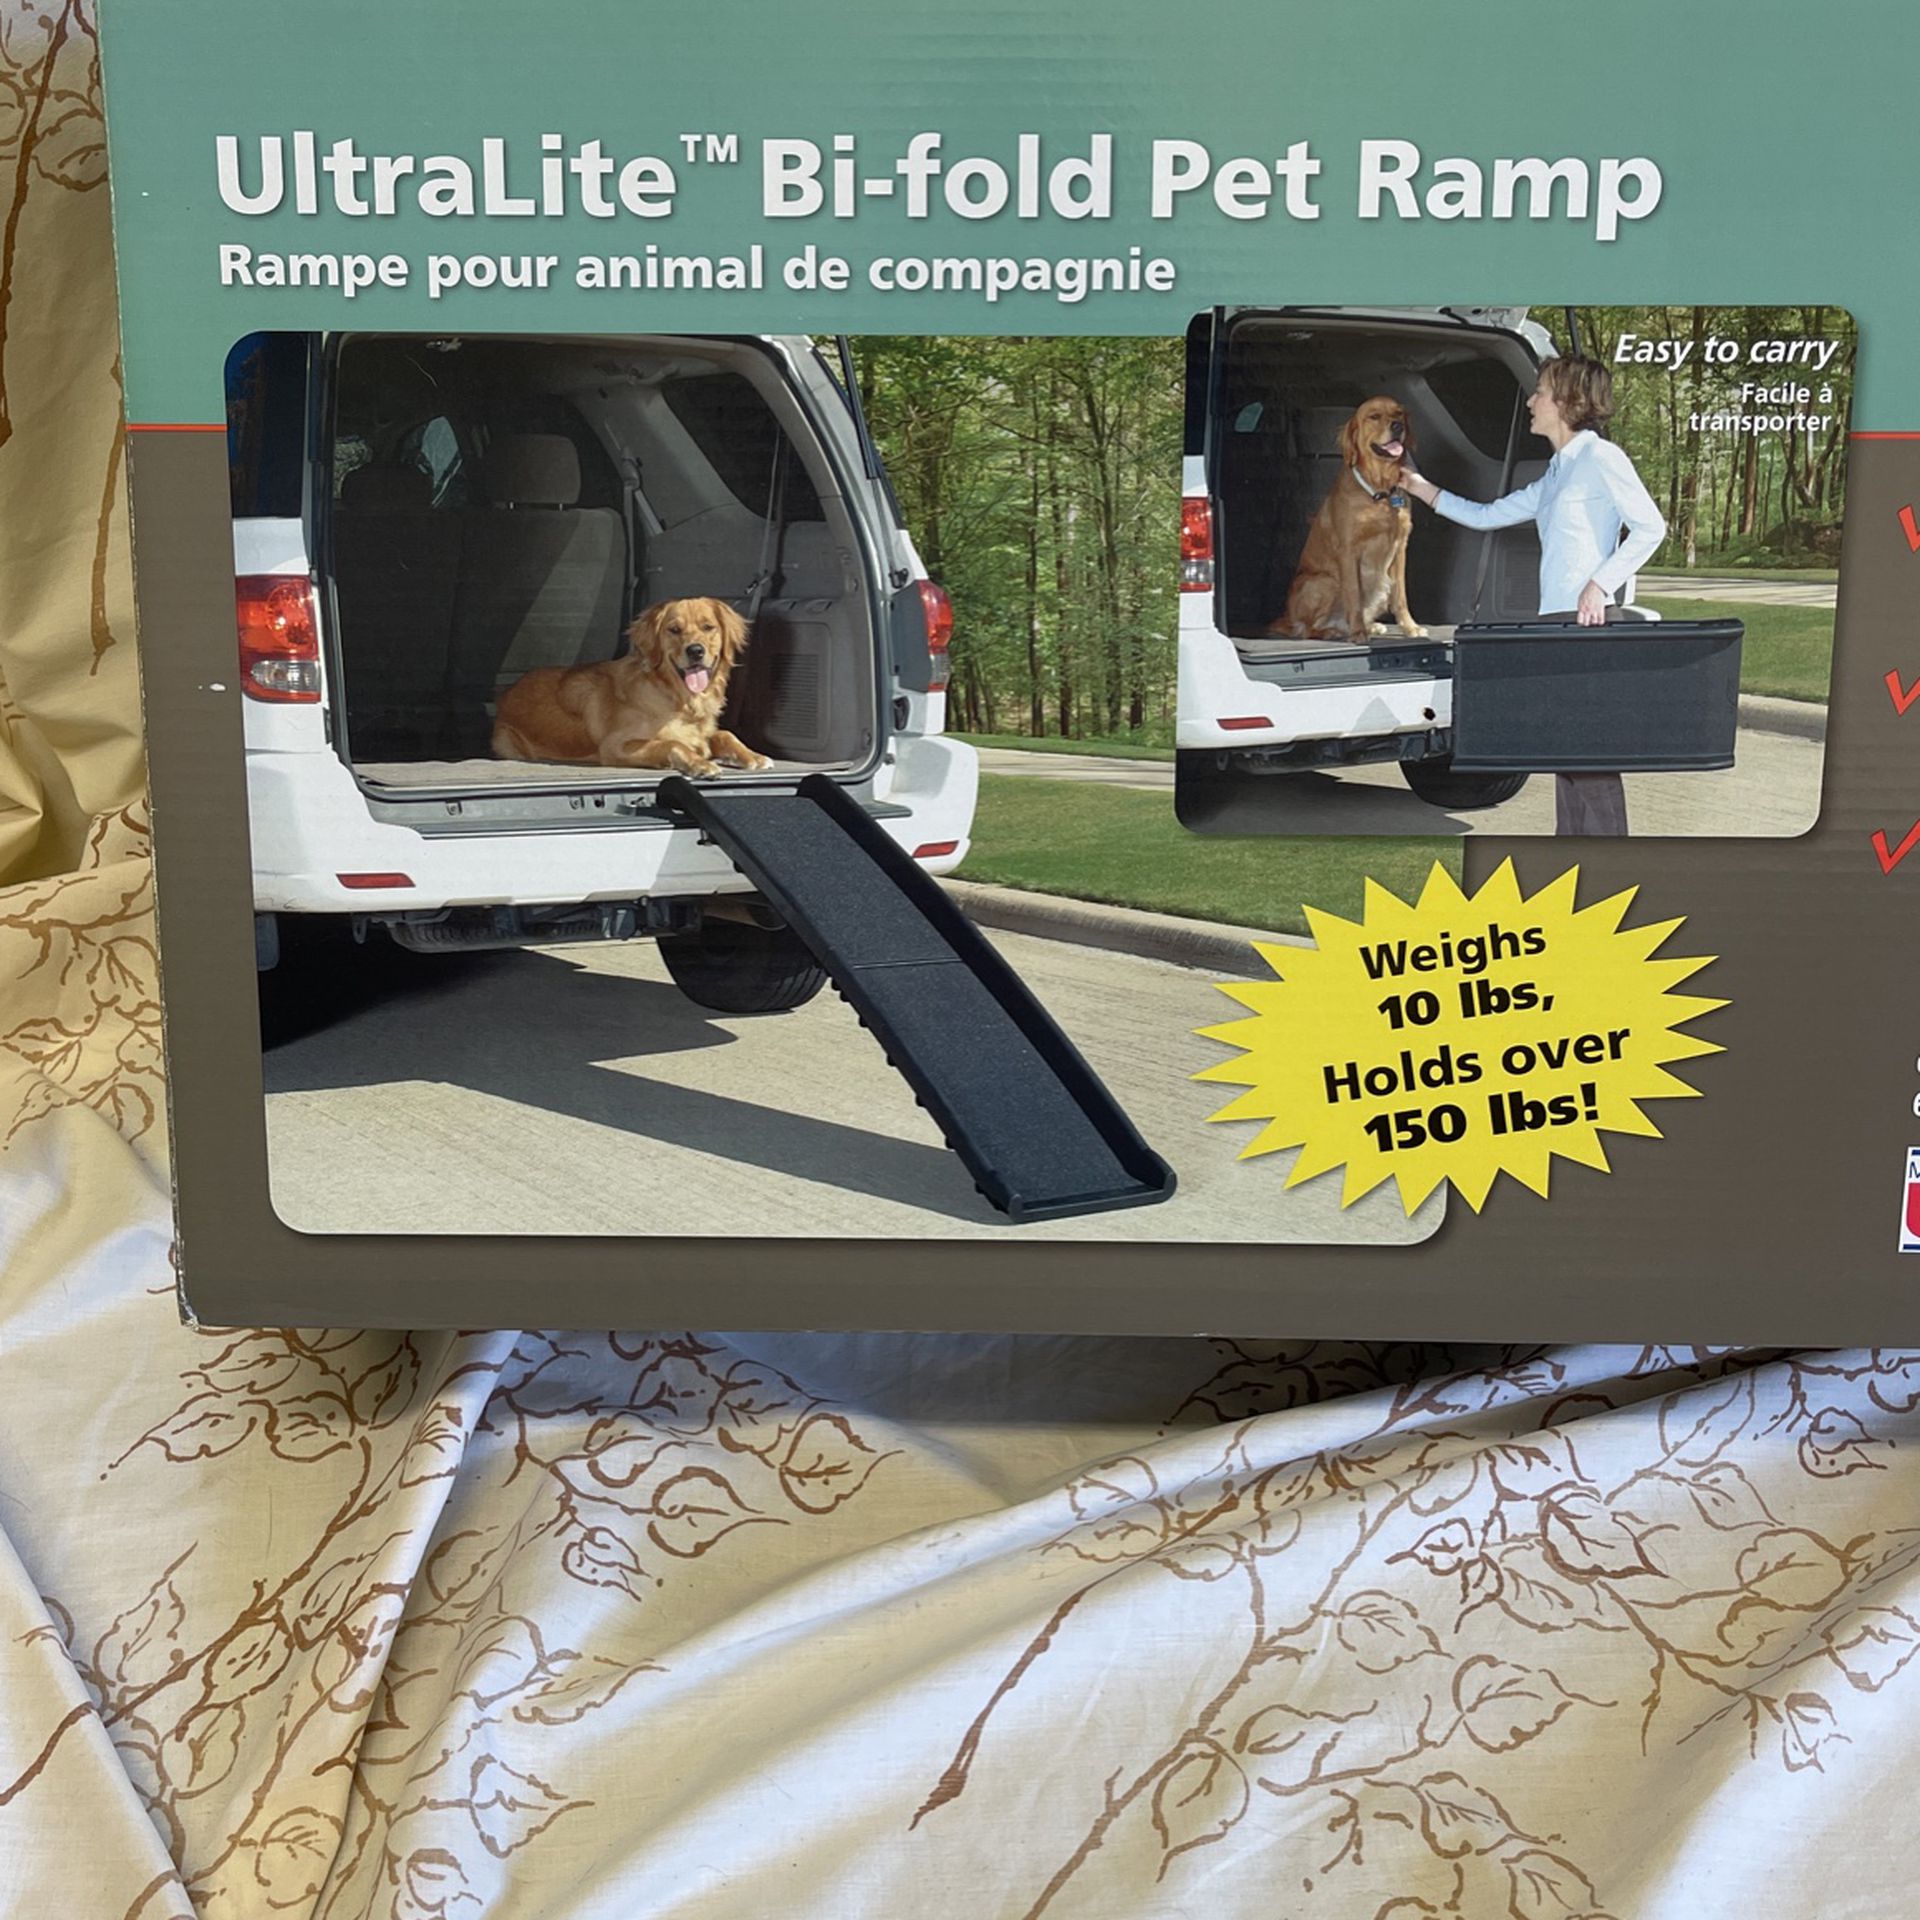 NEW Bi-fold DOG RAMP Weighs 10 pounds Holds over 150 pounds!